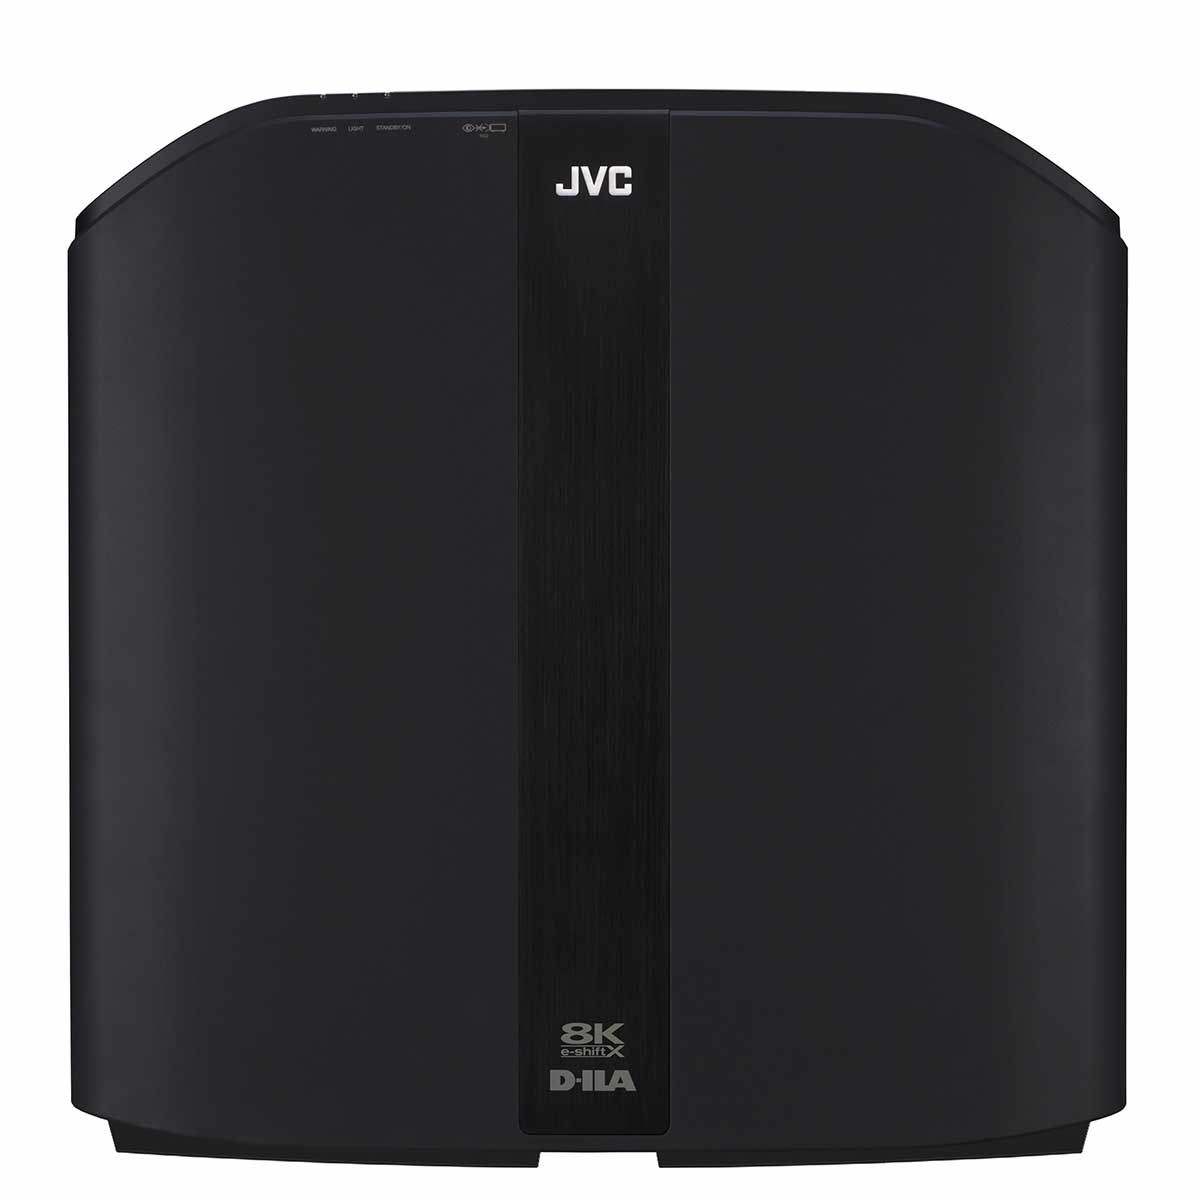 JVC DLA-NZ800 8K Home Theater Projector top view